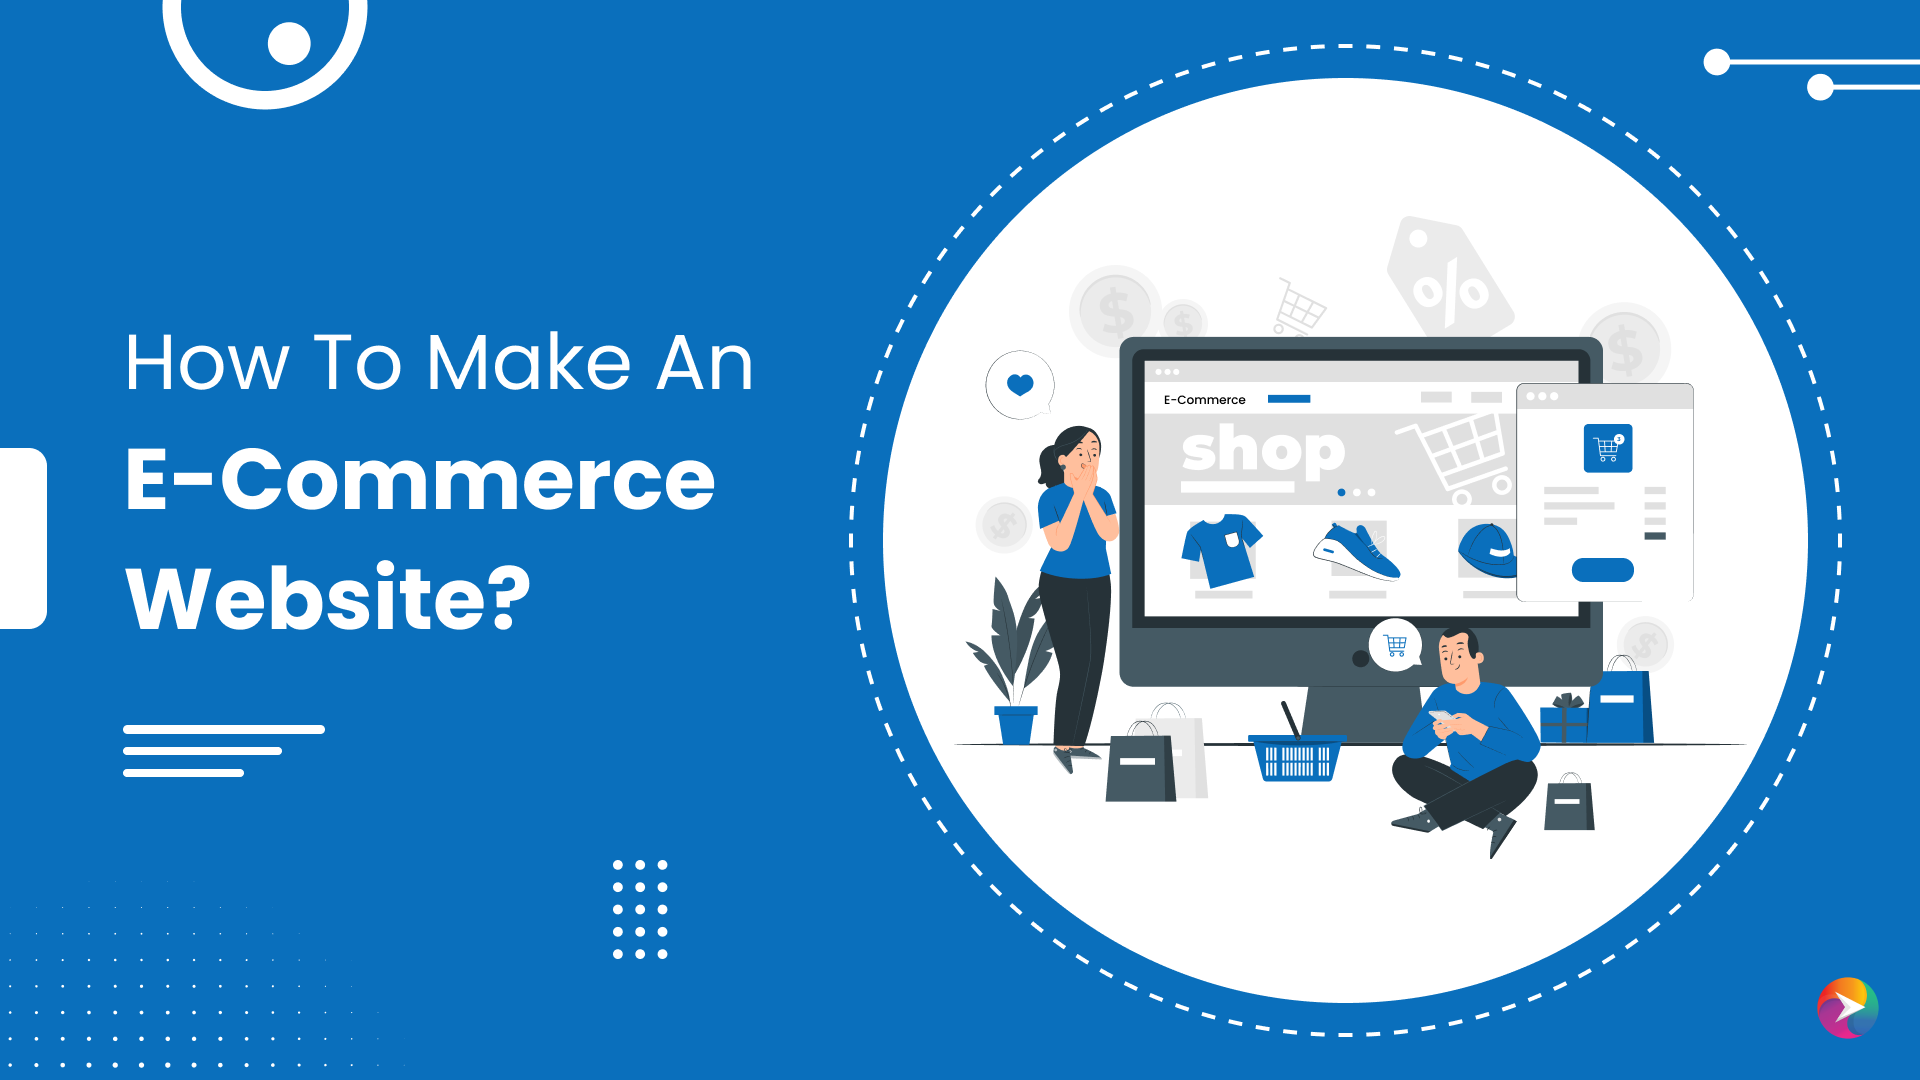 in this image there is an image on the right side illustrating how to make an e-commerce website